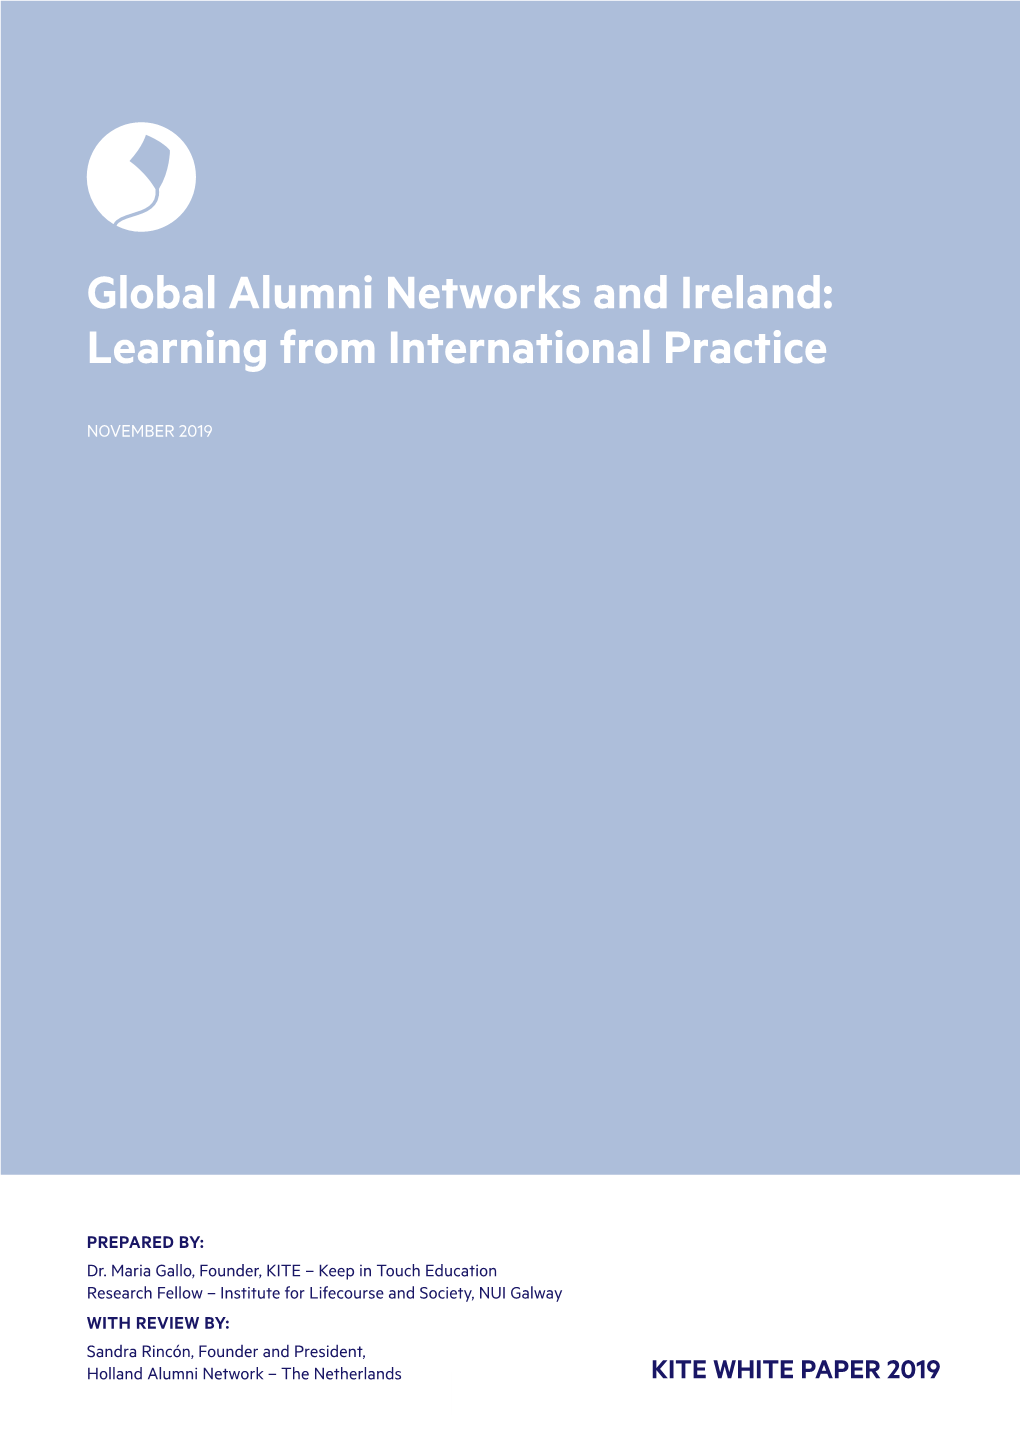 Global Alumni Networks and Ireland: Learning from International Practice